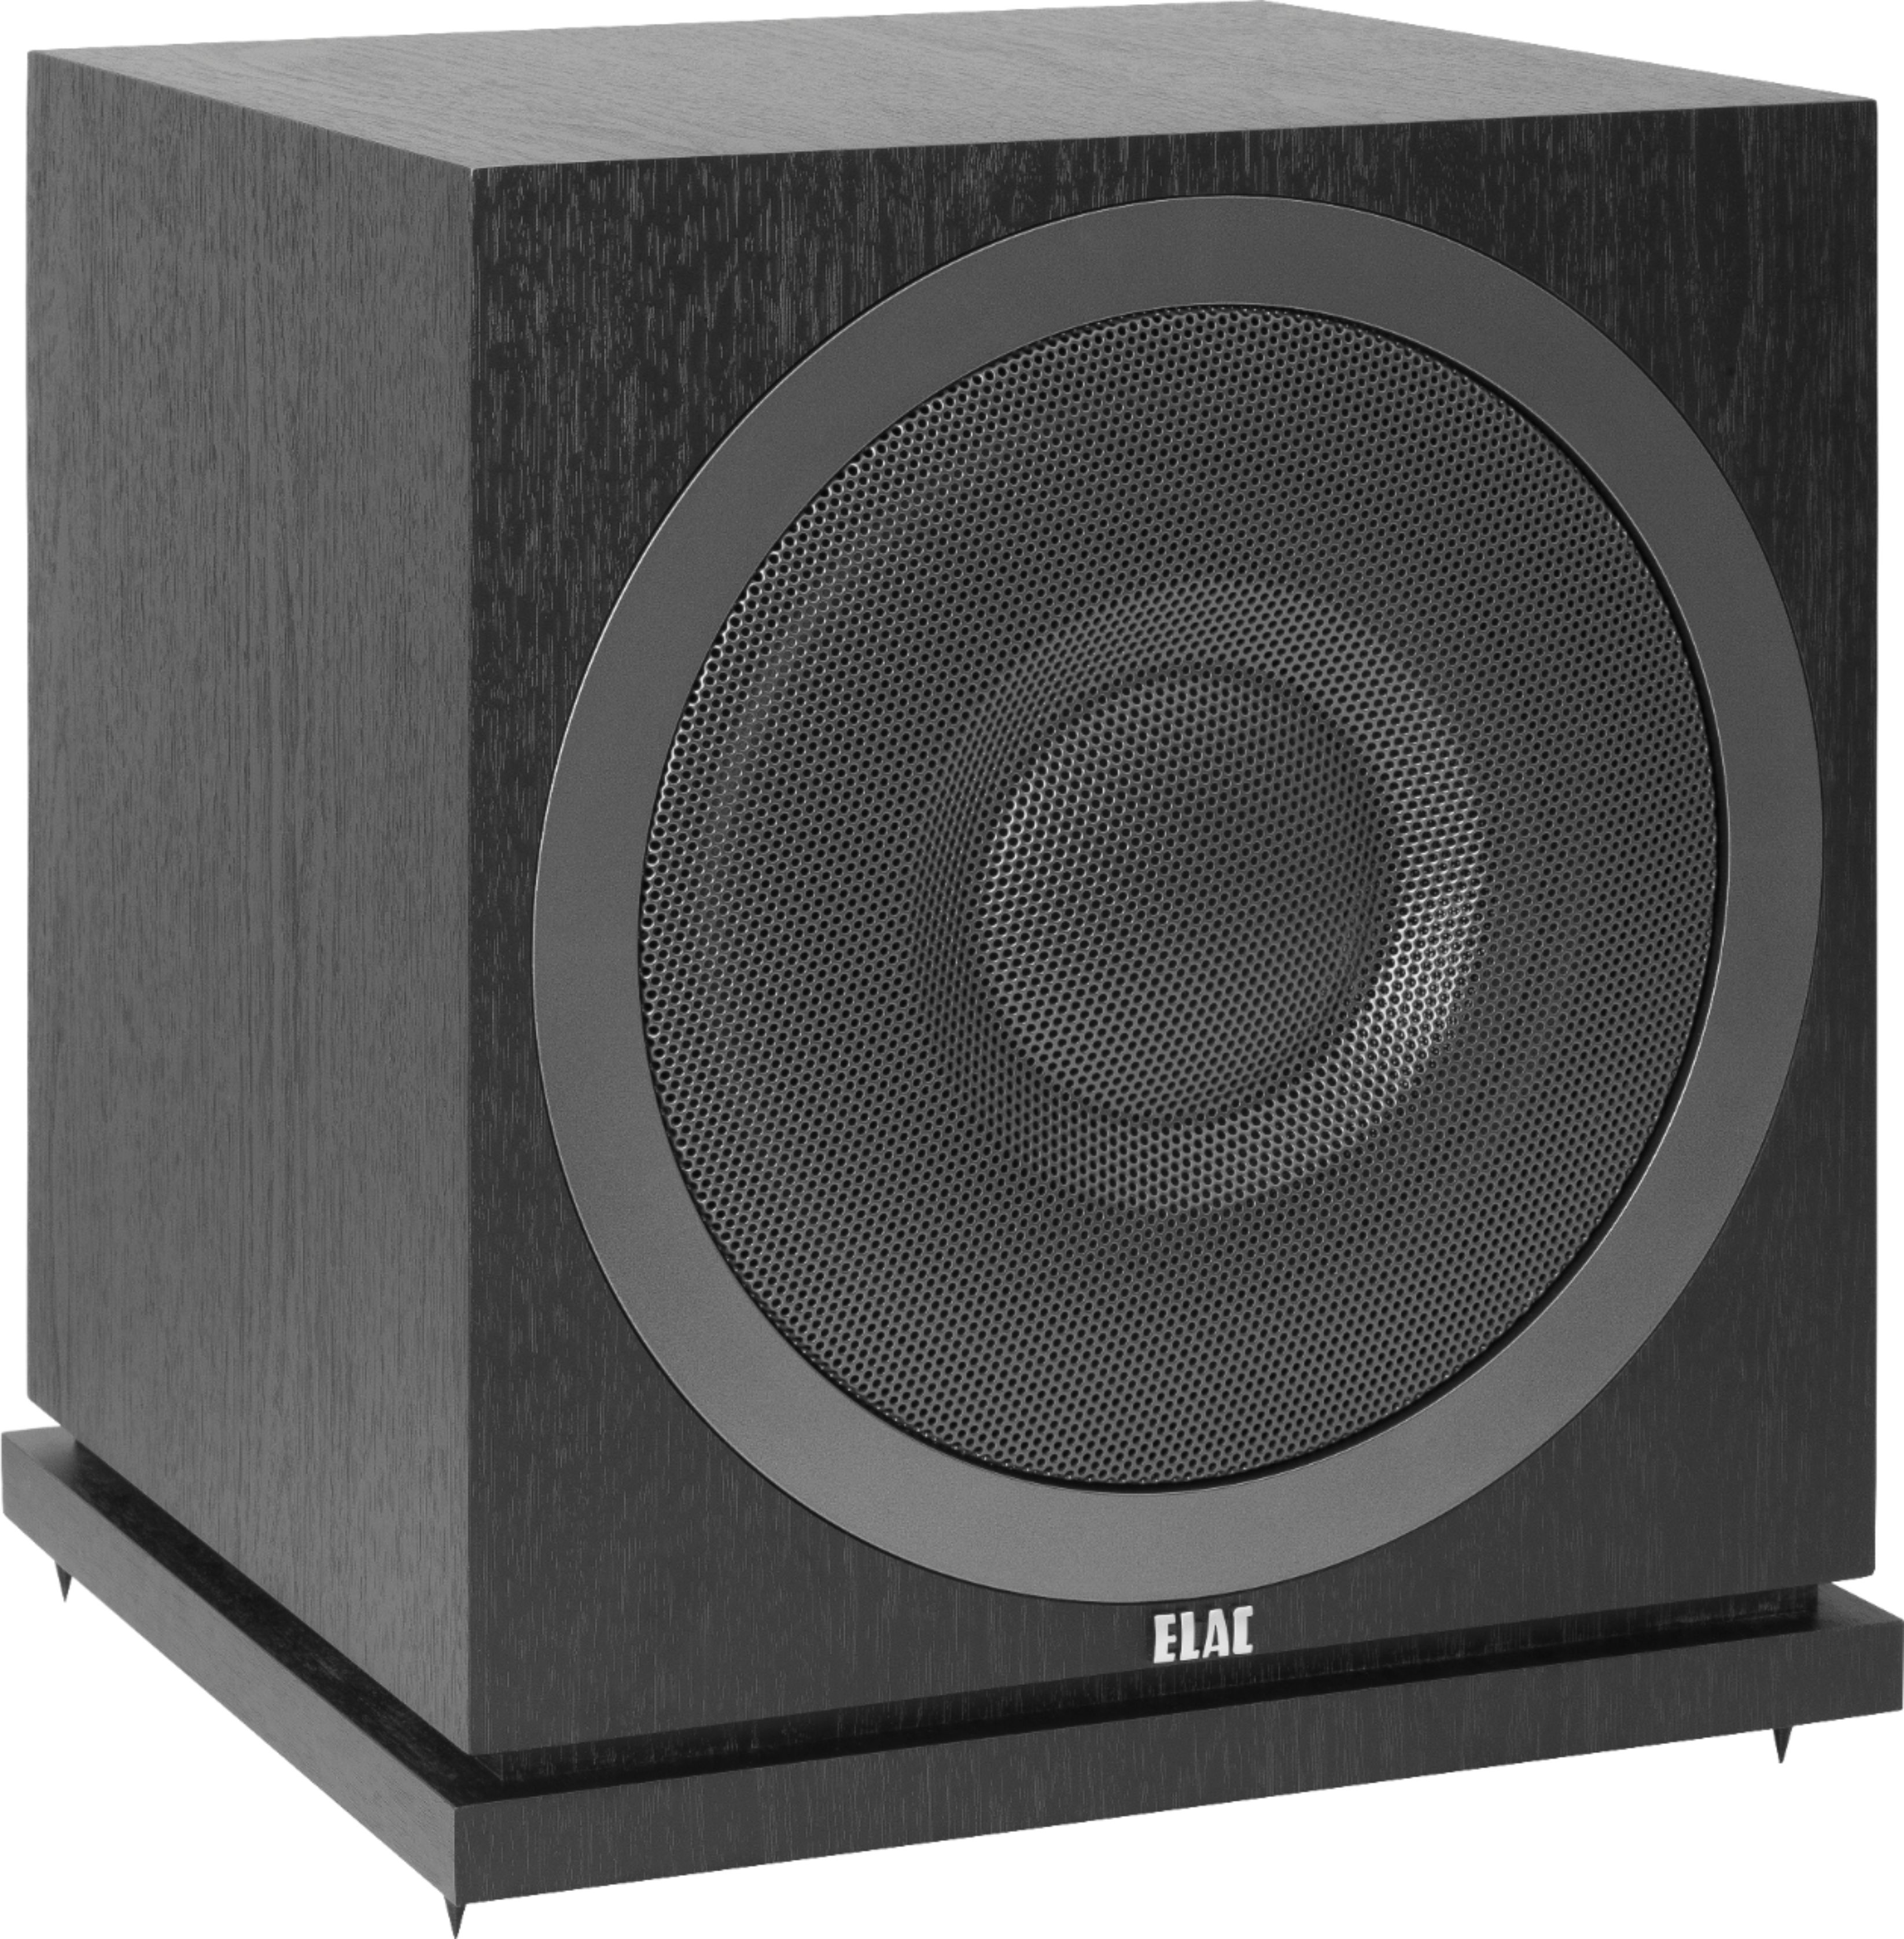 Angle View: ELAC - 3000 Series 10" 200W Powered Subwoofer (Each) - Black